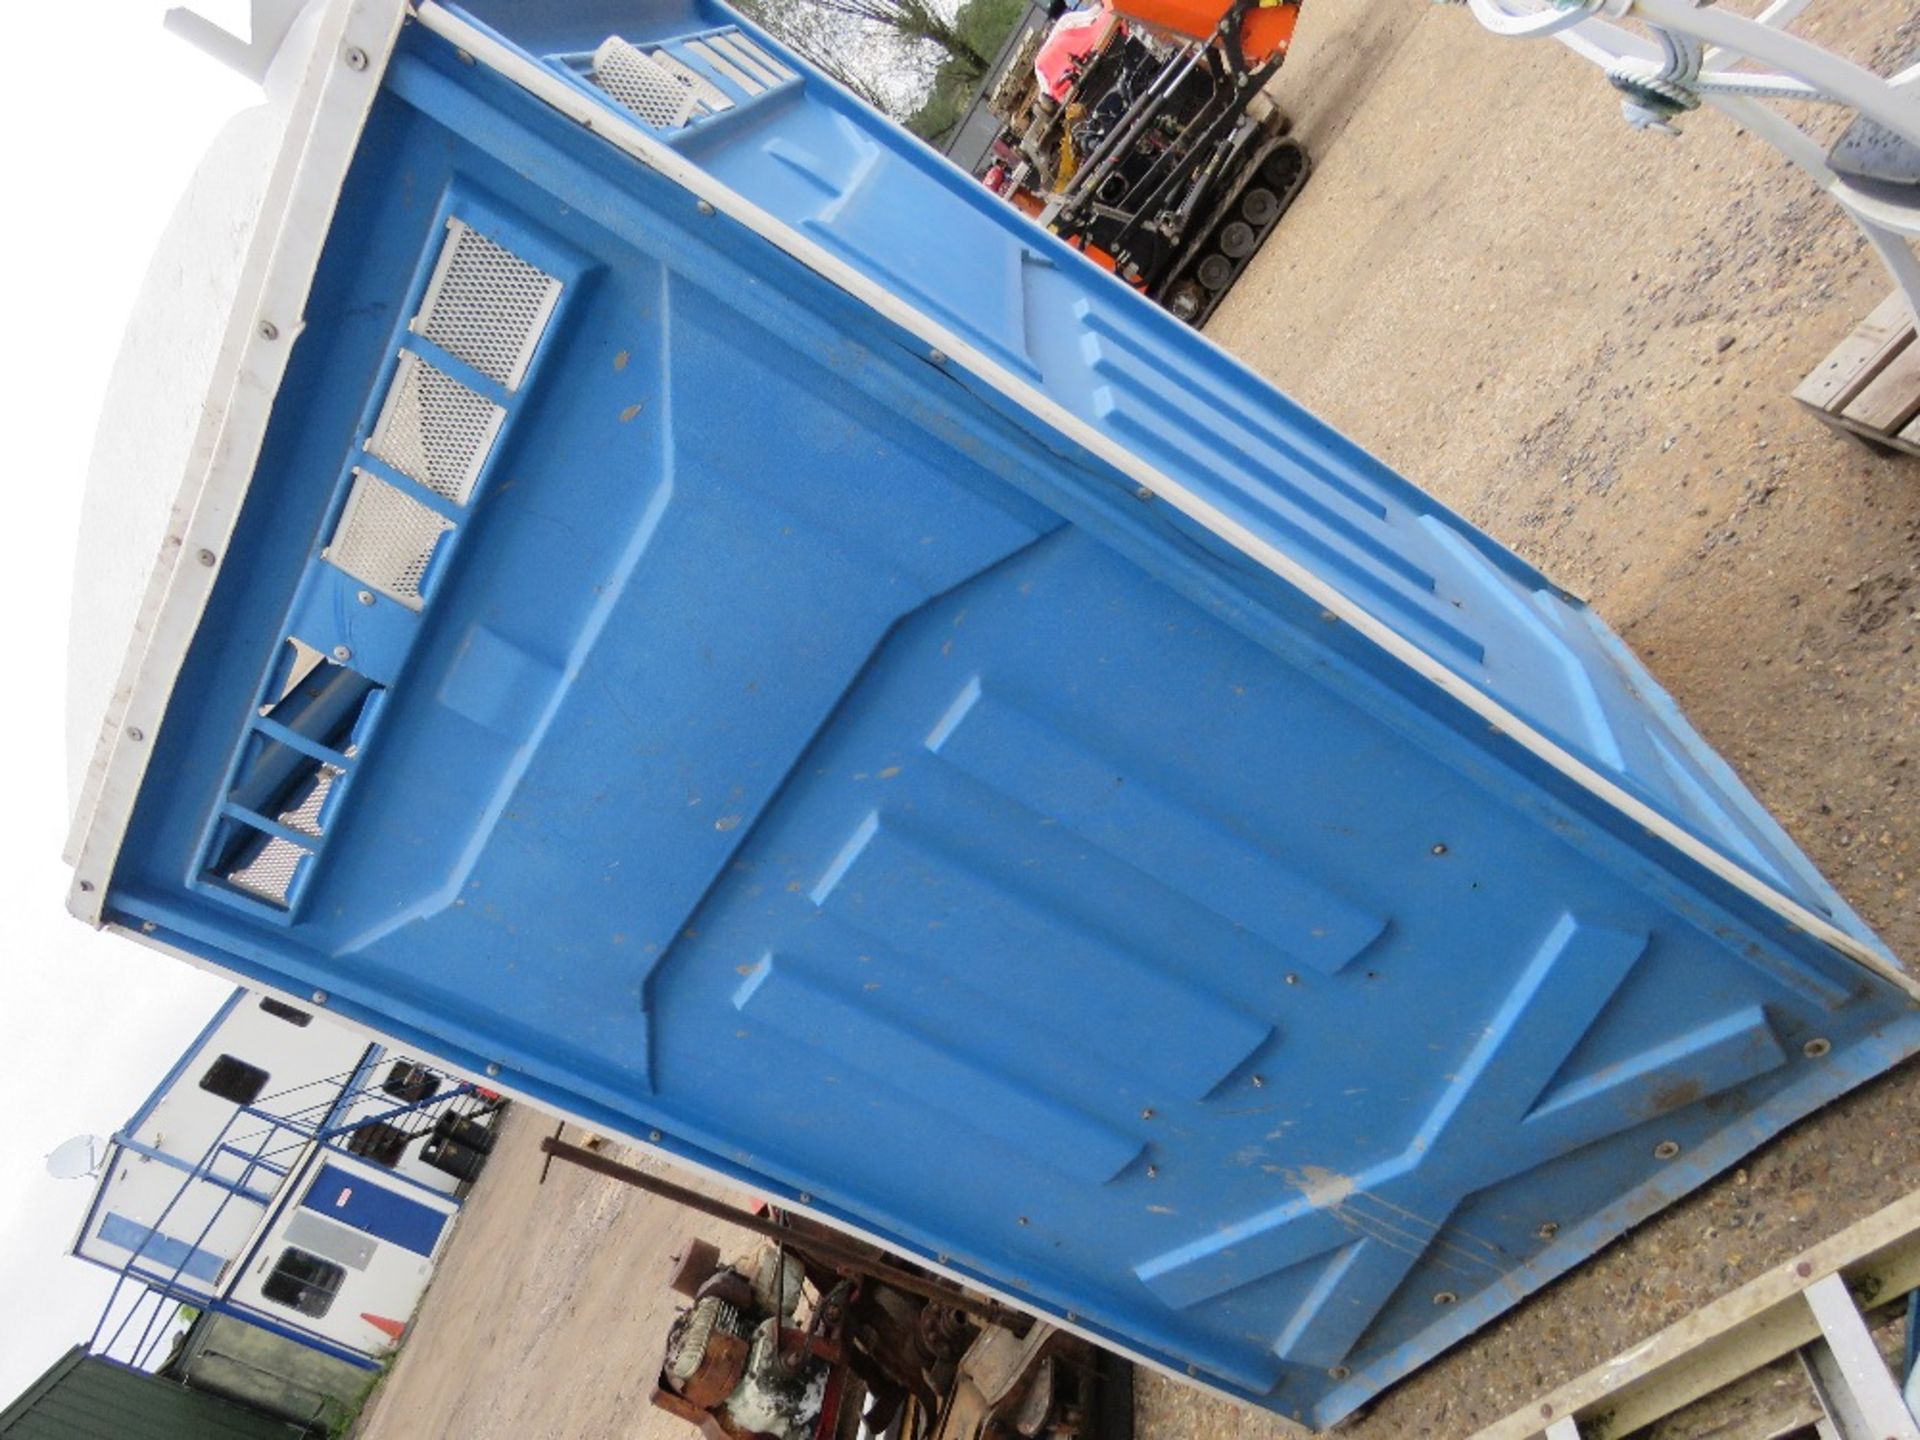 PORTABLE SITE TOILET. DIRECT FROM LOCAL LANDSCAPE COMPANY WHO ARE CLOSING A DEPOT. - Bild 2 aus 5